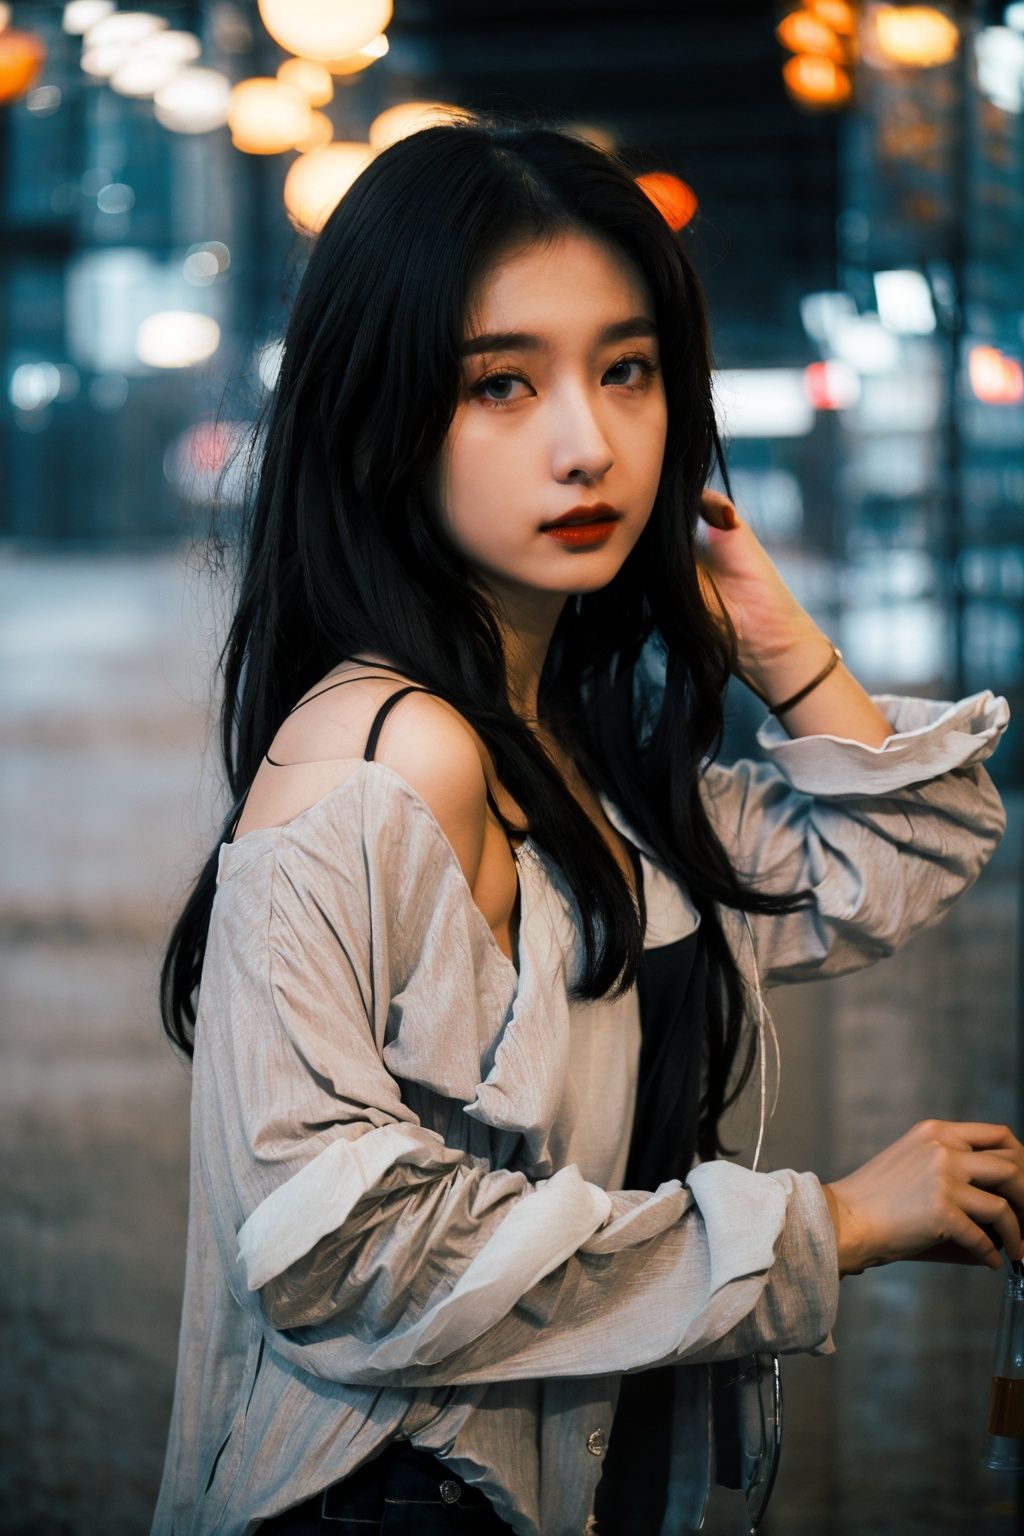   1  girl,  young,  solo,  (late  teens),  beautiful,  large  eyes,  light  makeup,  black  hair,  long  hair,  white  shirt,  jeans,  (boots:1.2),  thighhighs,  street,  night,  city  lights,  neon  signs,  HDR,  Accent  Lighting,  close-up,  upper  body,  looking  at  viewer,  beautiful  detailed  eyes,  light  blush,  nose  blush,  vibrant,  energetic,  urban,  modern,  (cinematic  composition:1.2),  depth  of  field,  realistic,  ambient  light.
Wuqiii,